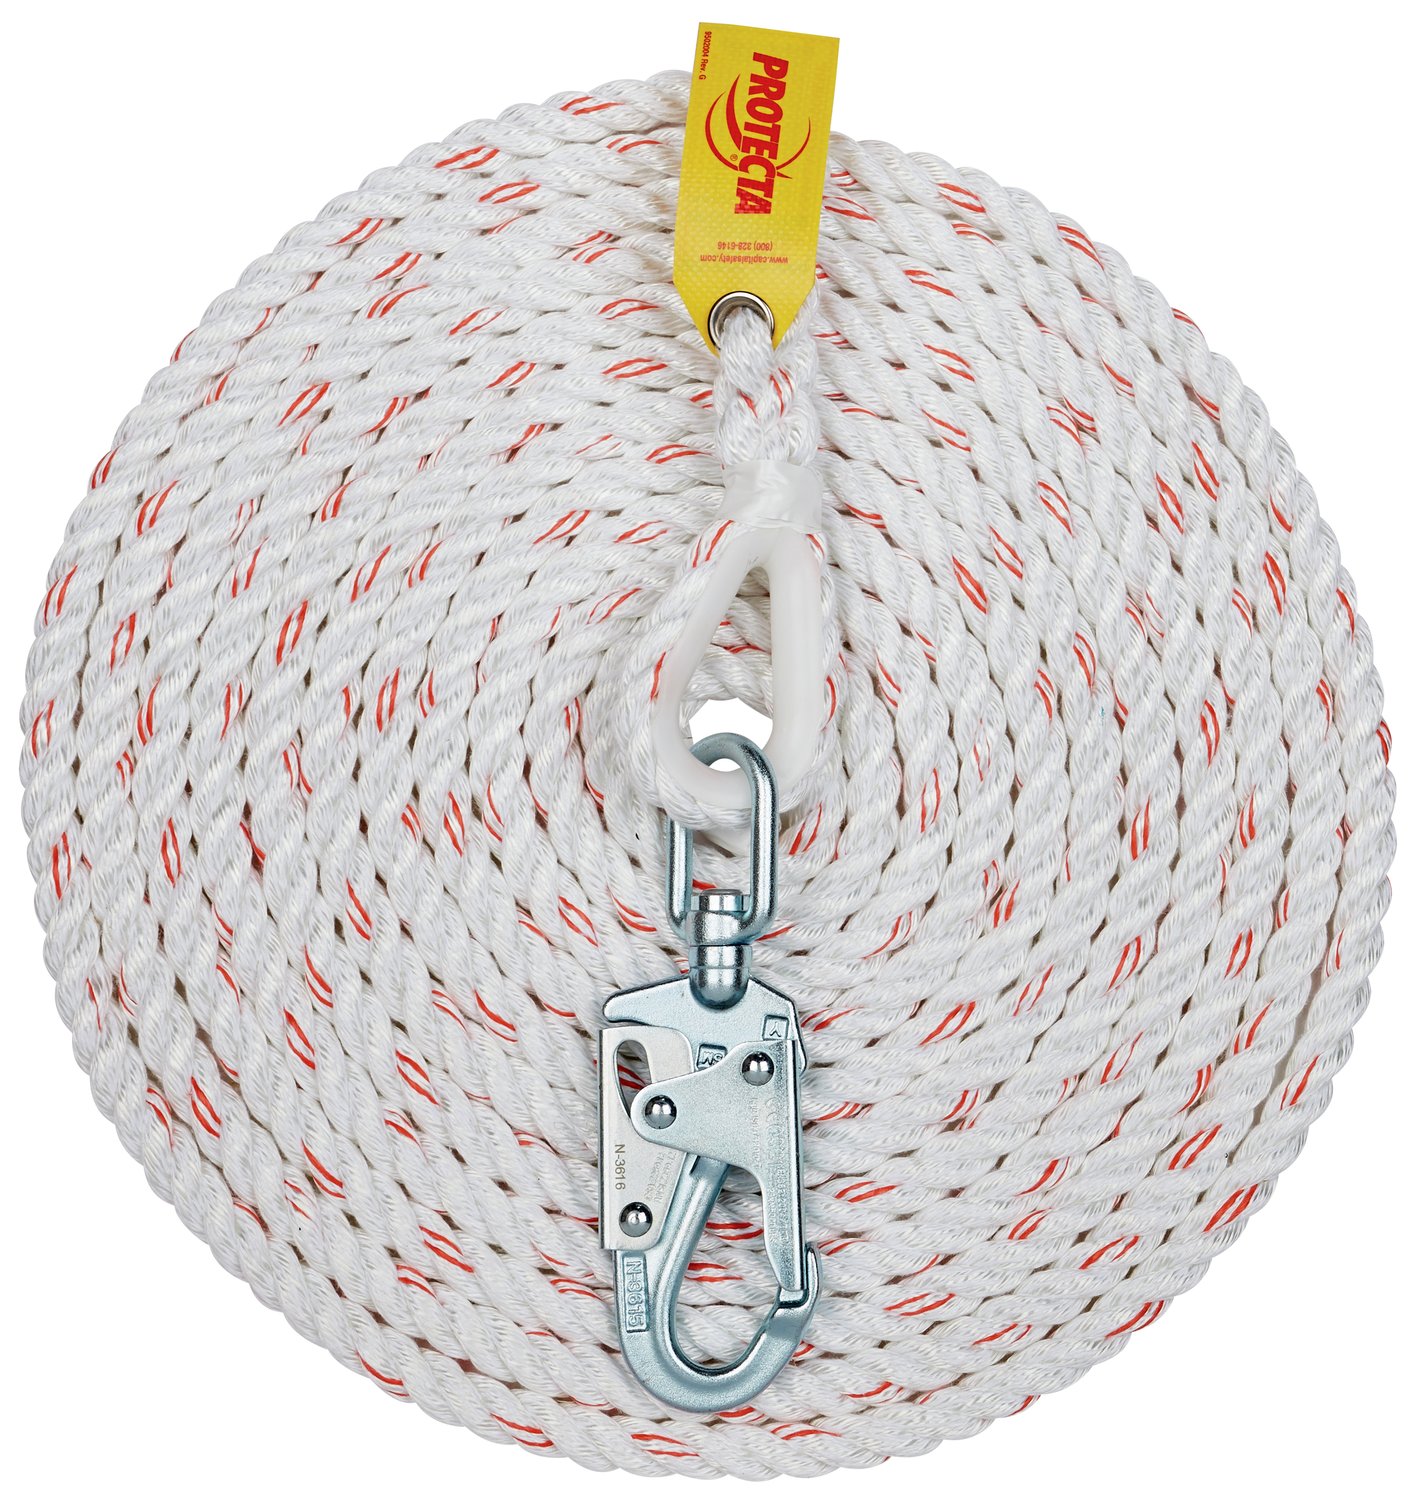 7012529203 - 3M Protecta Rope Lifeline with Swivel Snap Hook 1299992, 5/8 in Polyester and Polypropylene Blend, White, 75 ft